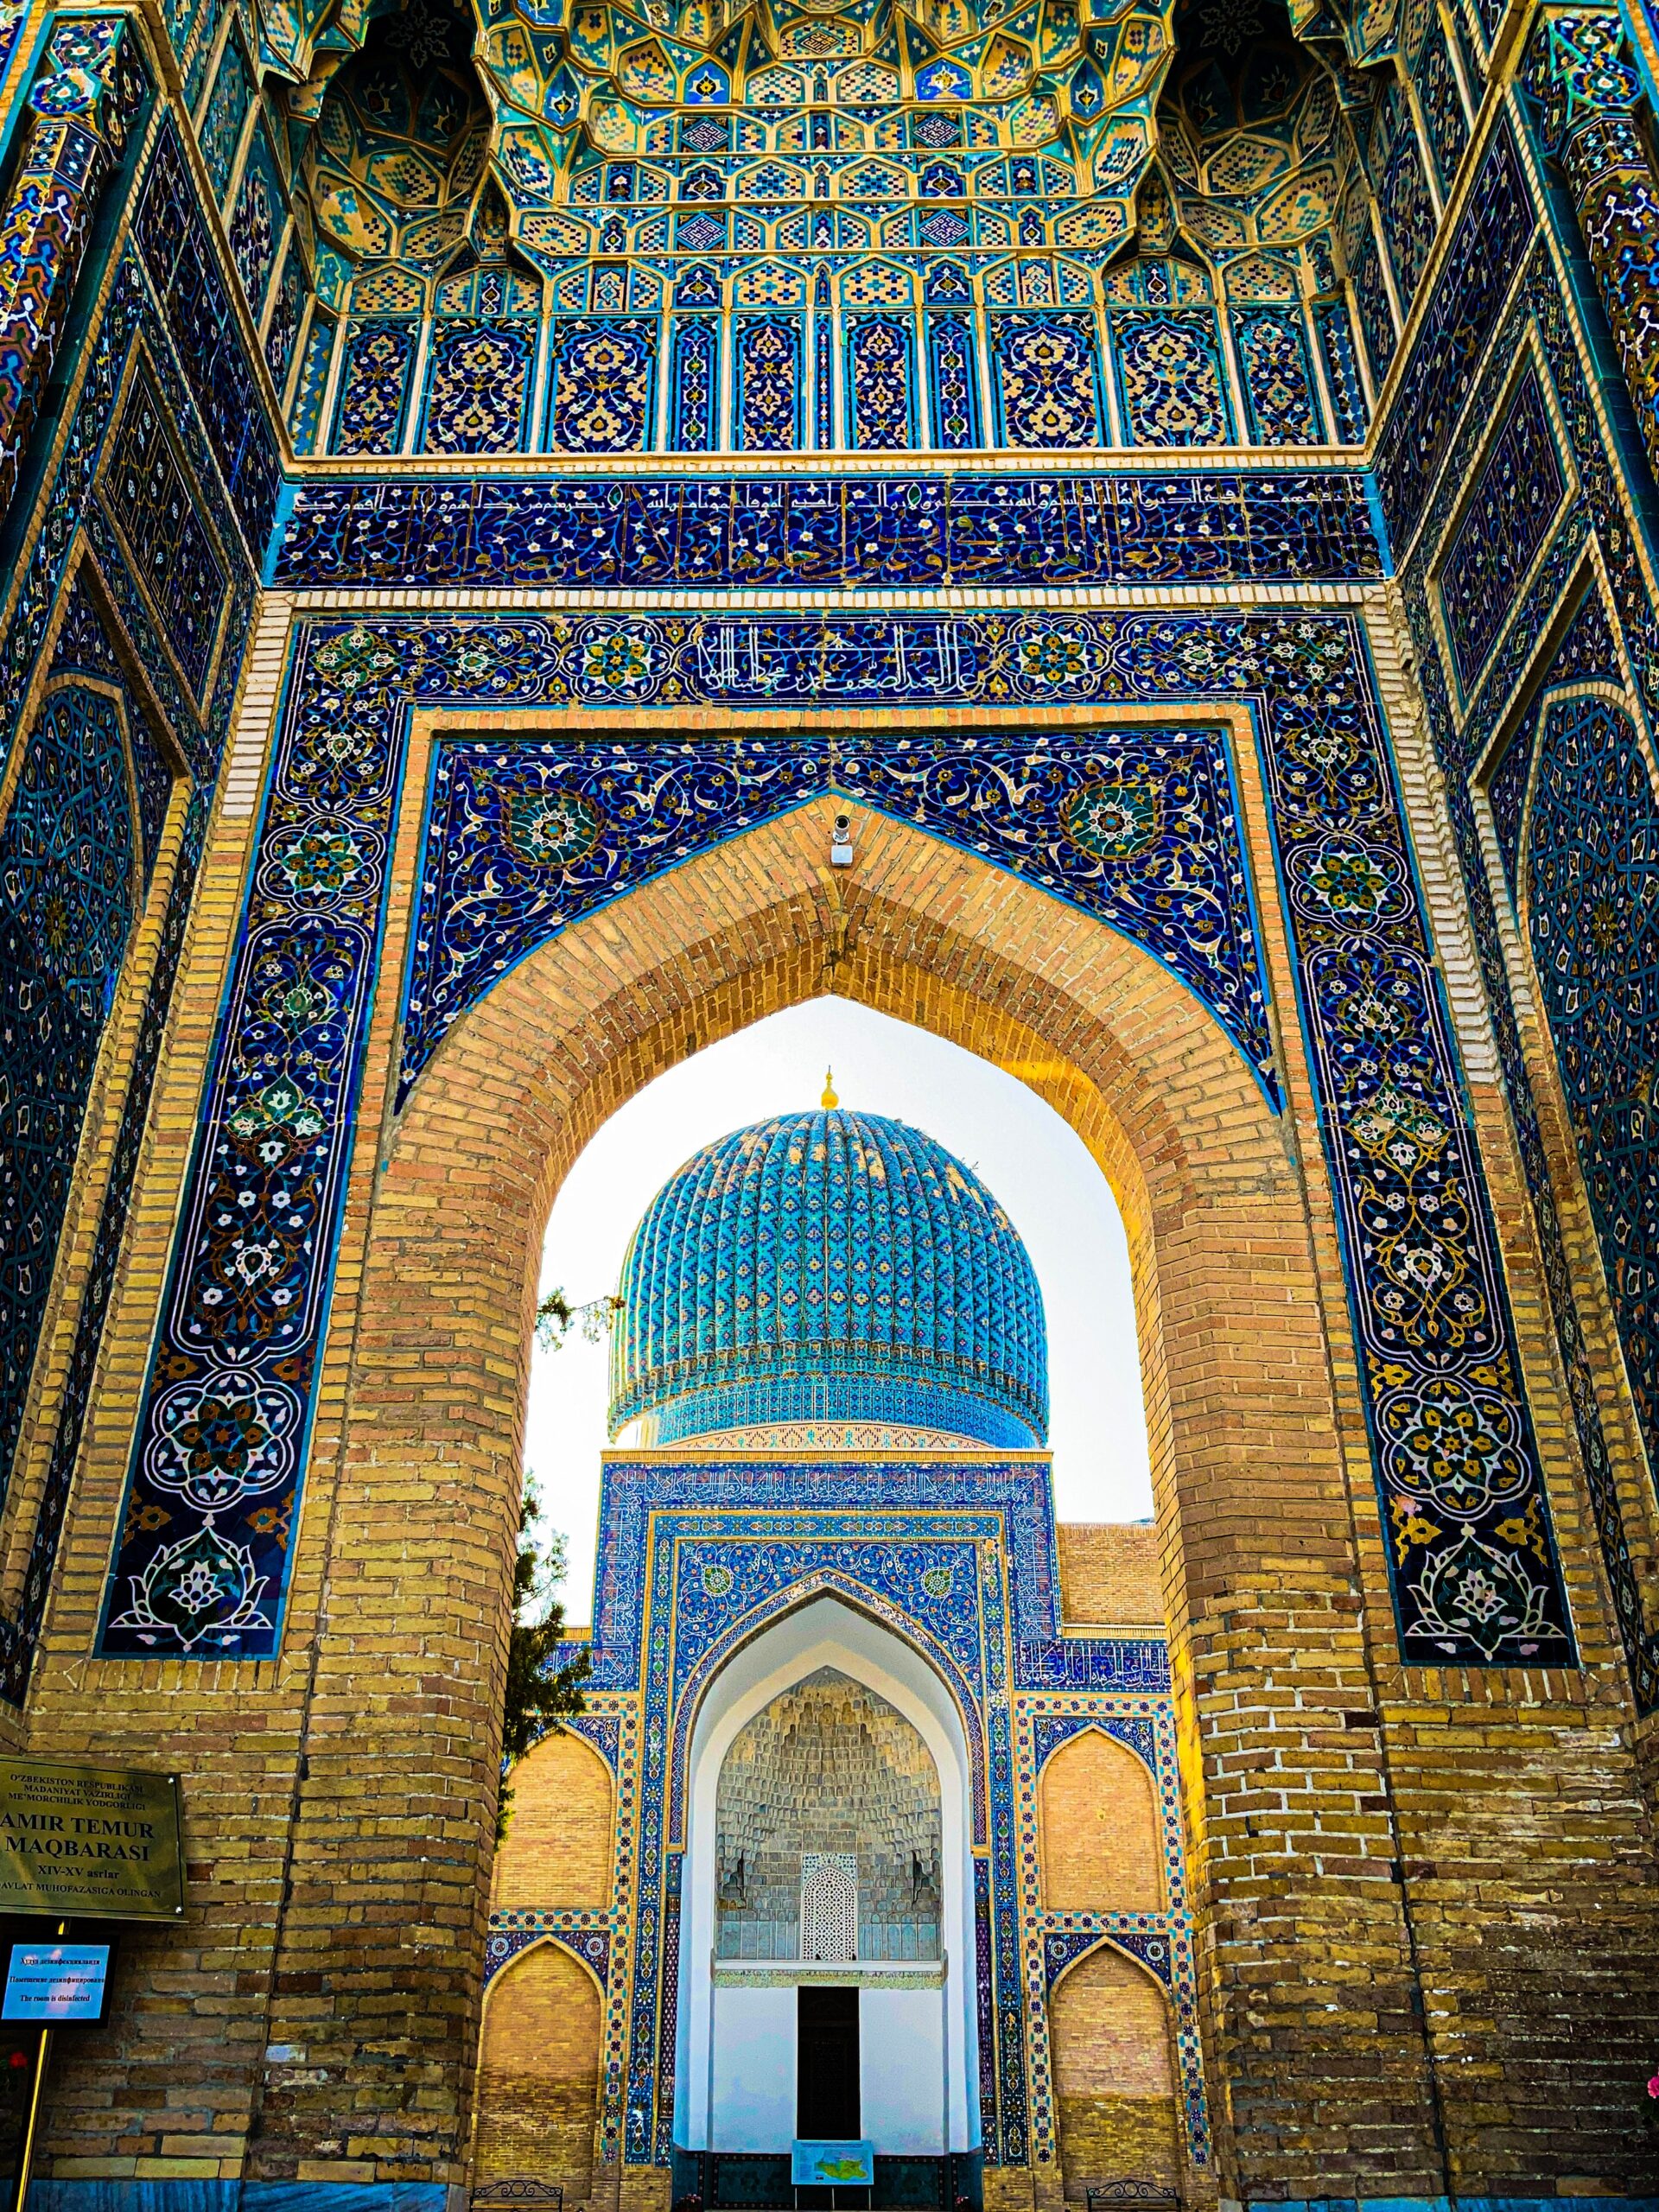 Fly to Central Asia with Points- Uzbekistan